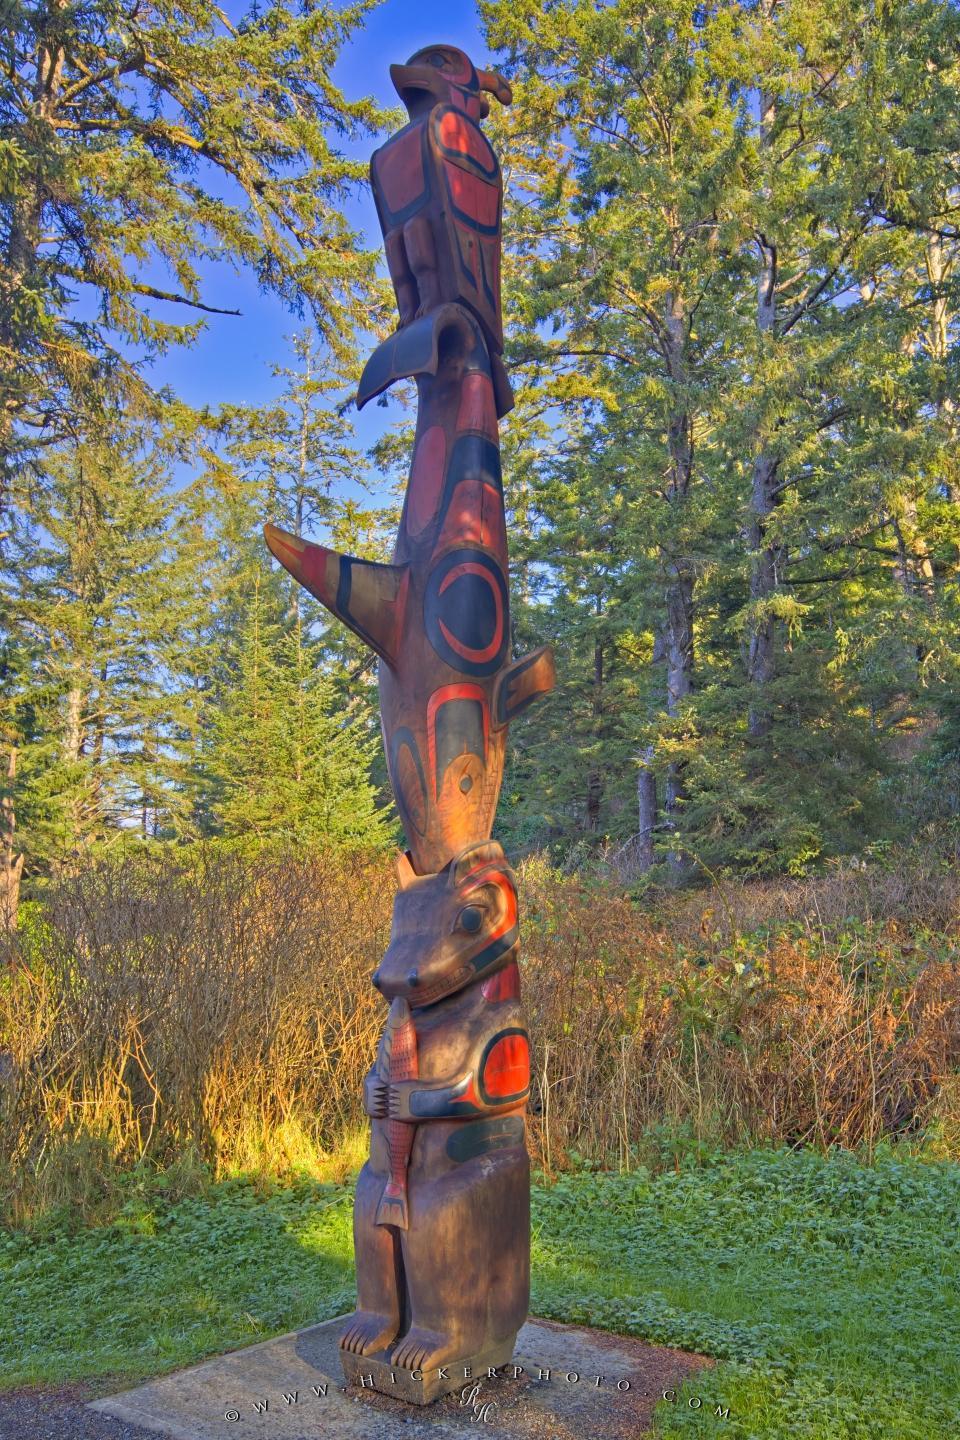 Free wallpaper background: First Nations Totem Native American Art